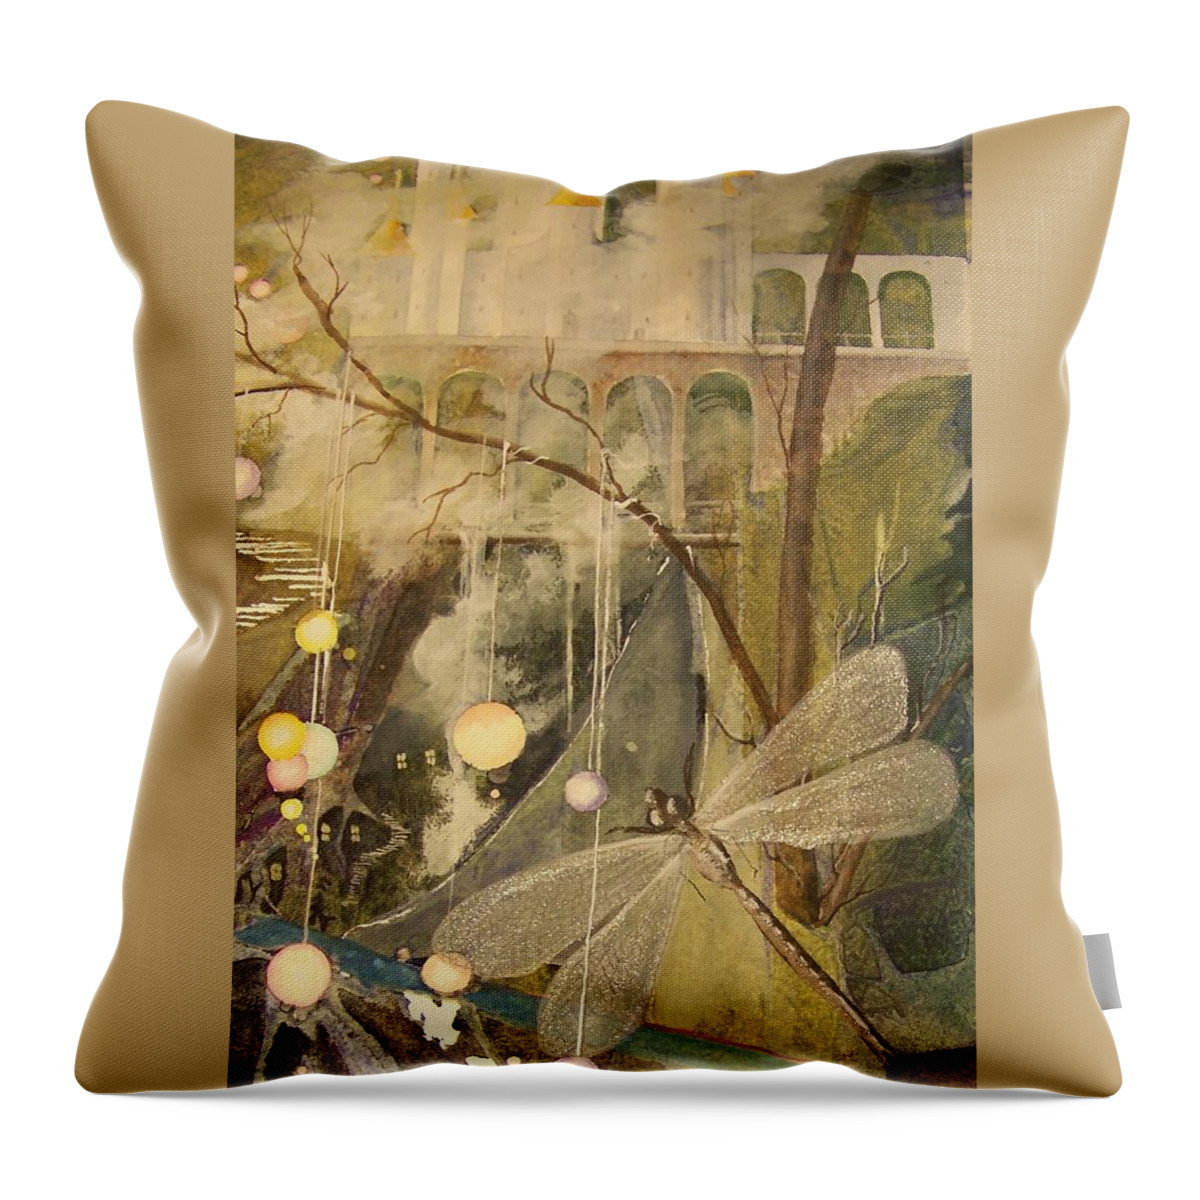 Castle Throw Pillow featuring the painting Ganth III by Jackie Mueller-Jones